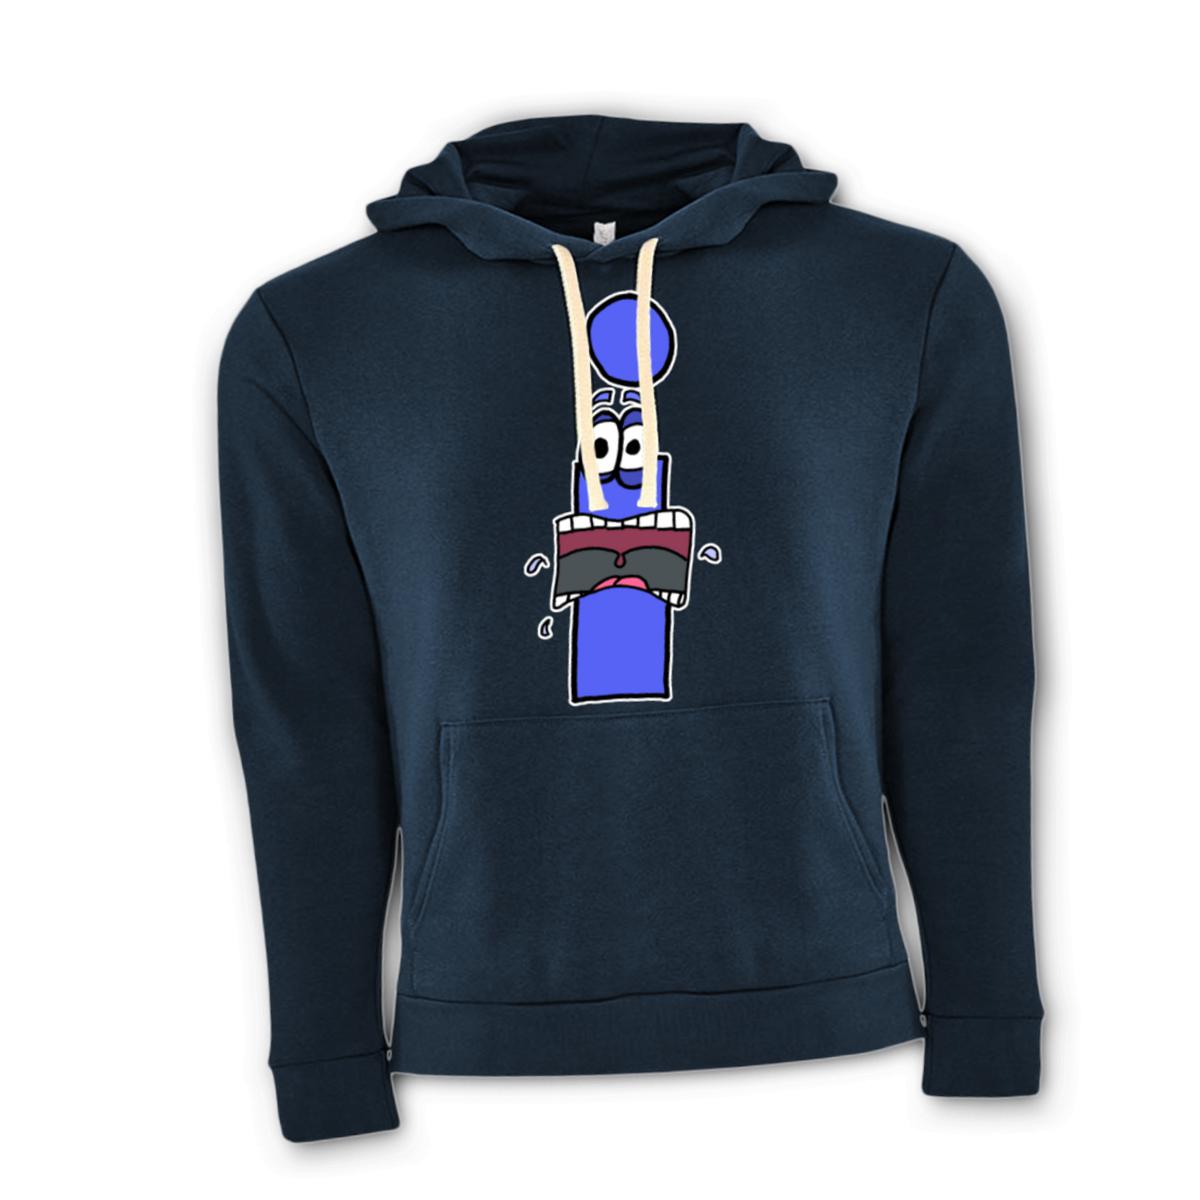 I Scream Unisex Pullover Hoodie Double Extra Large midnight-navy